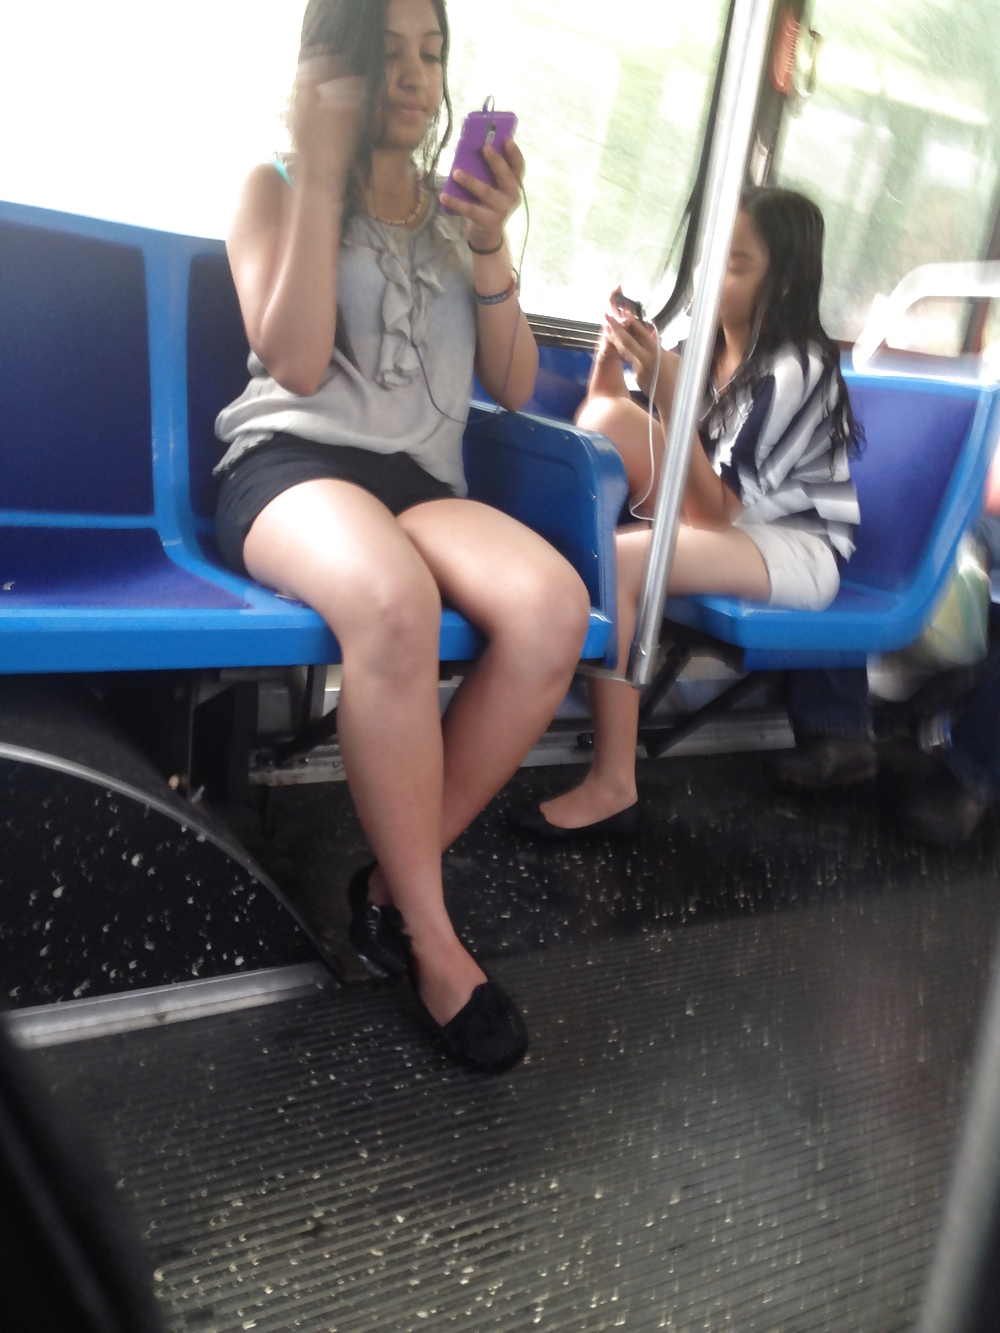 Just couldnt stop staring at her legs. #17542584